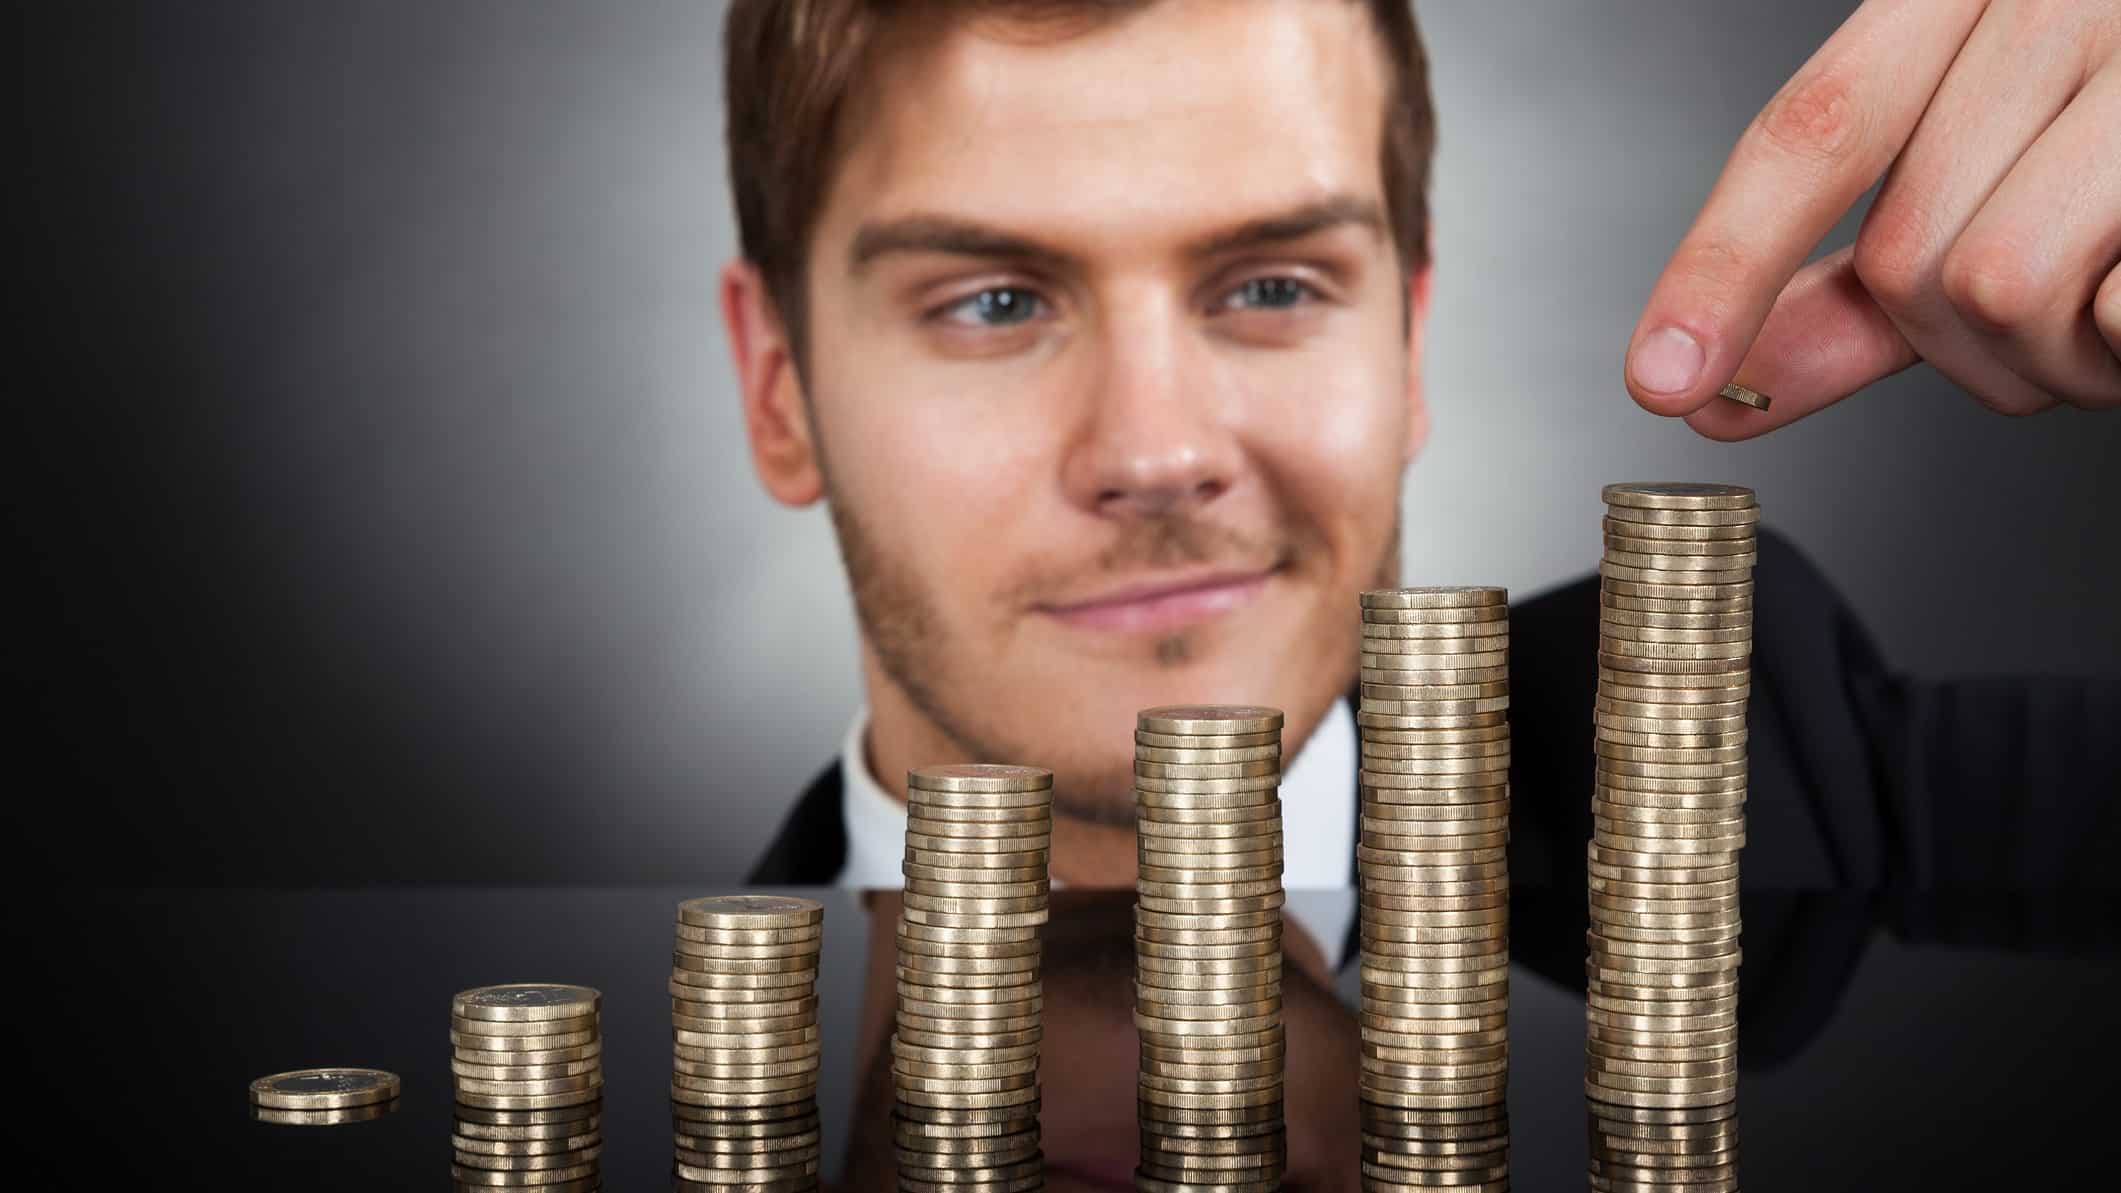 A man with a wry smile on his face is shown close up behind ascending piles of coins as he places another coin on top of the tallest stack representing the rising Brickworks dividend yield